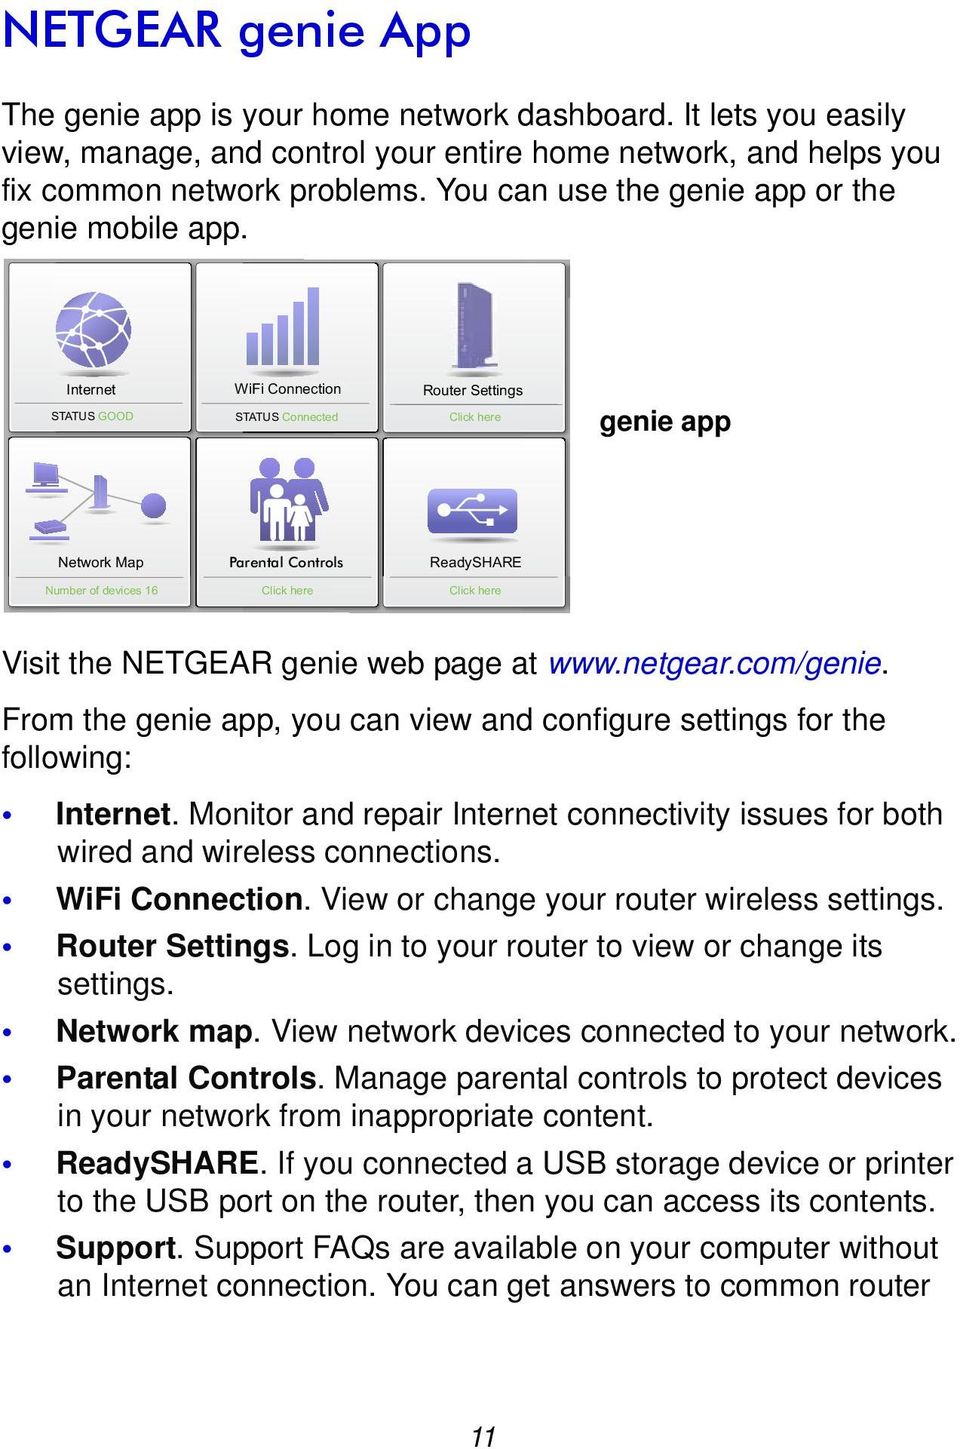 Internet STATUS GOOD WiFi Connection STATUS Connected Router Settings Click here genie app Network Map Parental Controls ReadySHARE Number of devices 16 Click here Click here Visit the NETGEAR genie